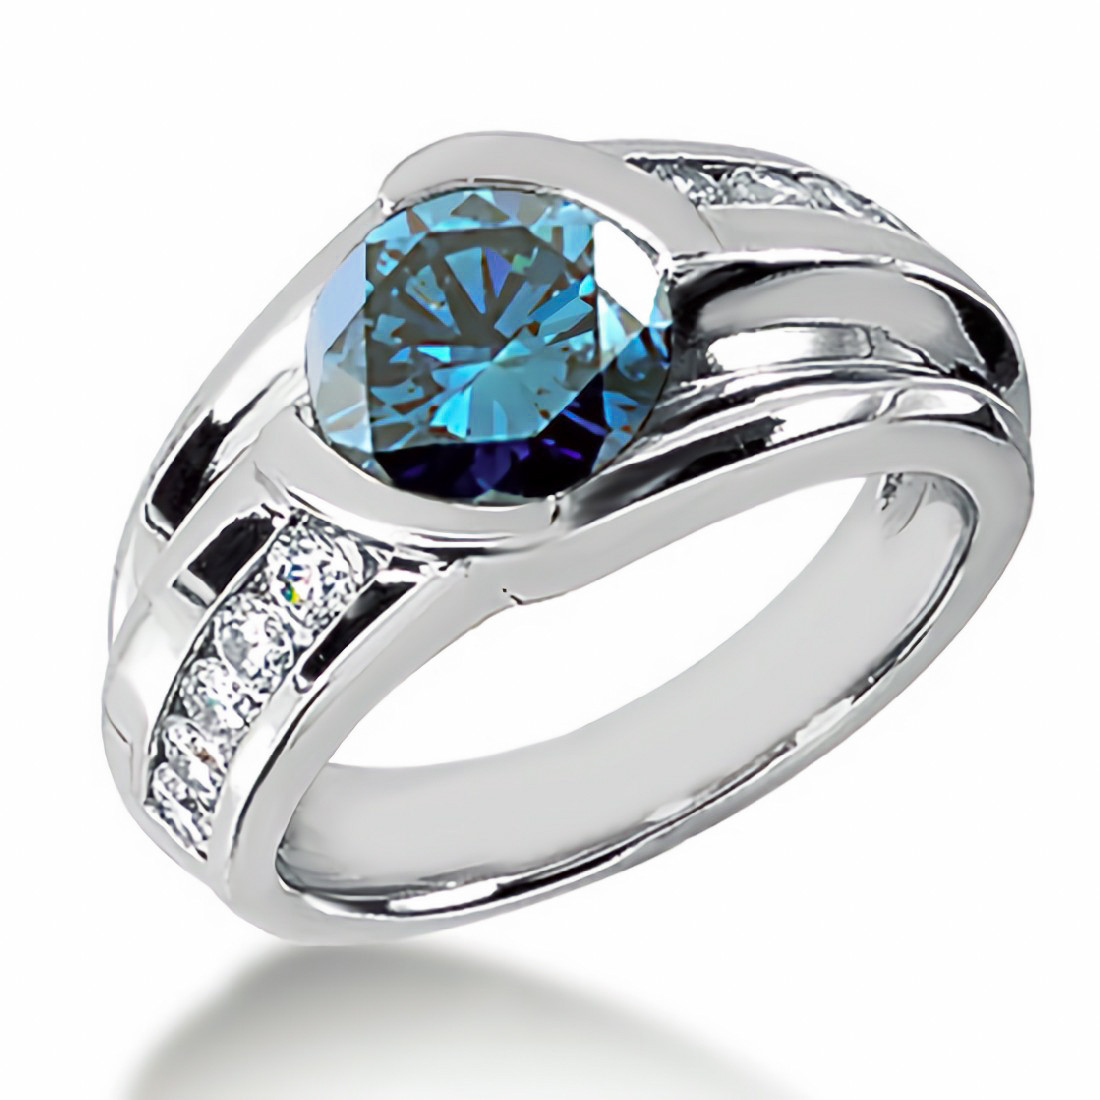 2.51ct Fancy Blue Diamond Men's Pinky Solitaire Ring